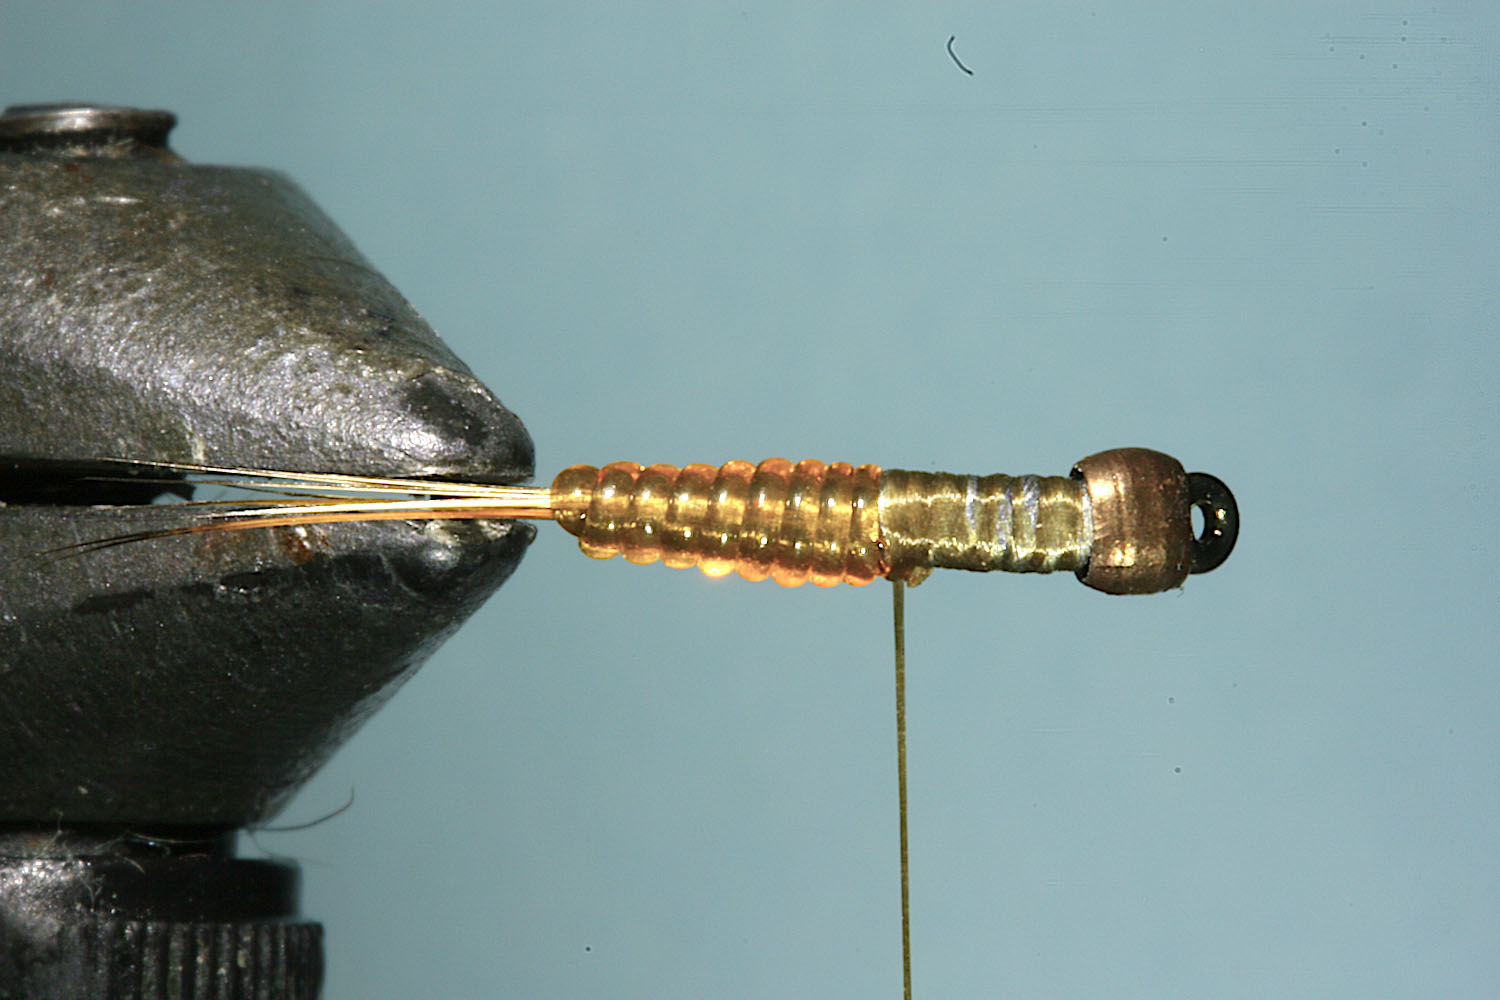 Step 5 of tying sequence for jelly crimp nymph fly